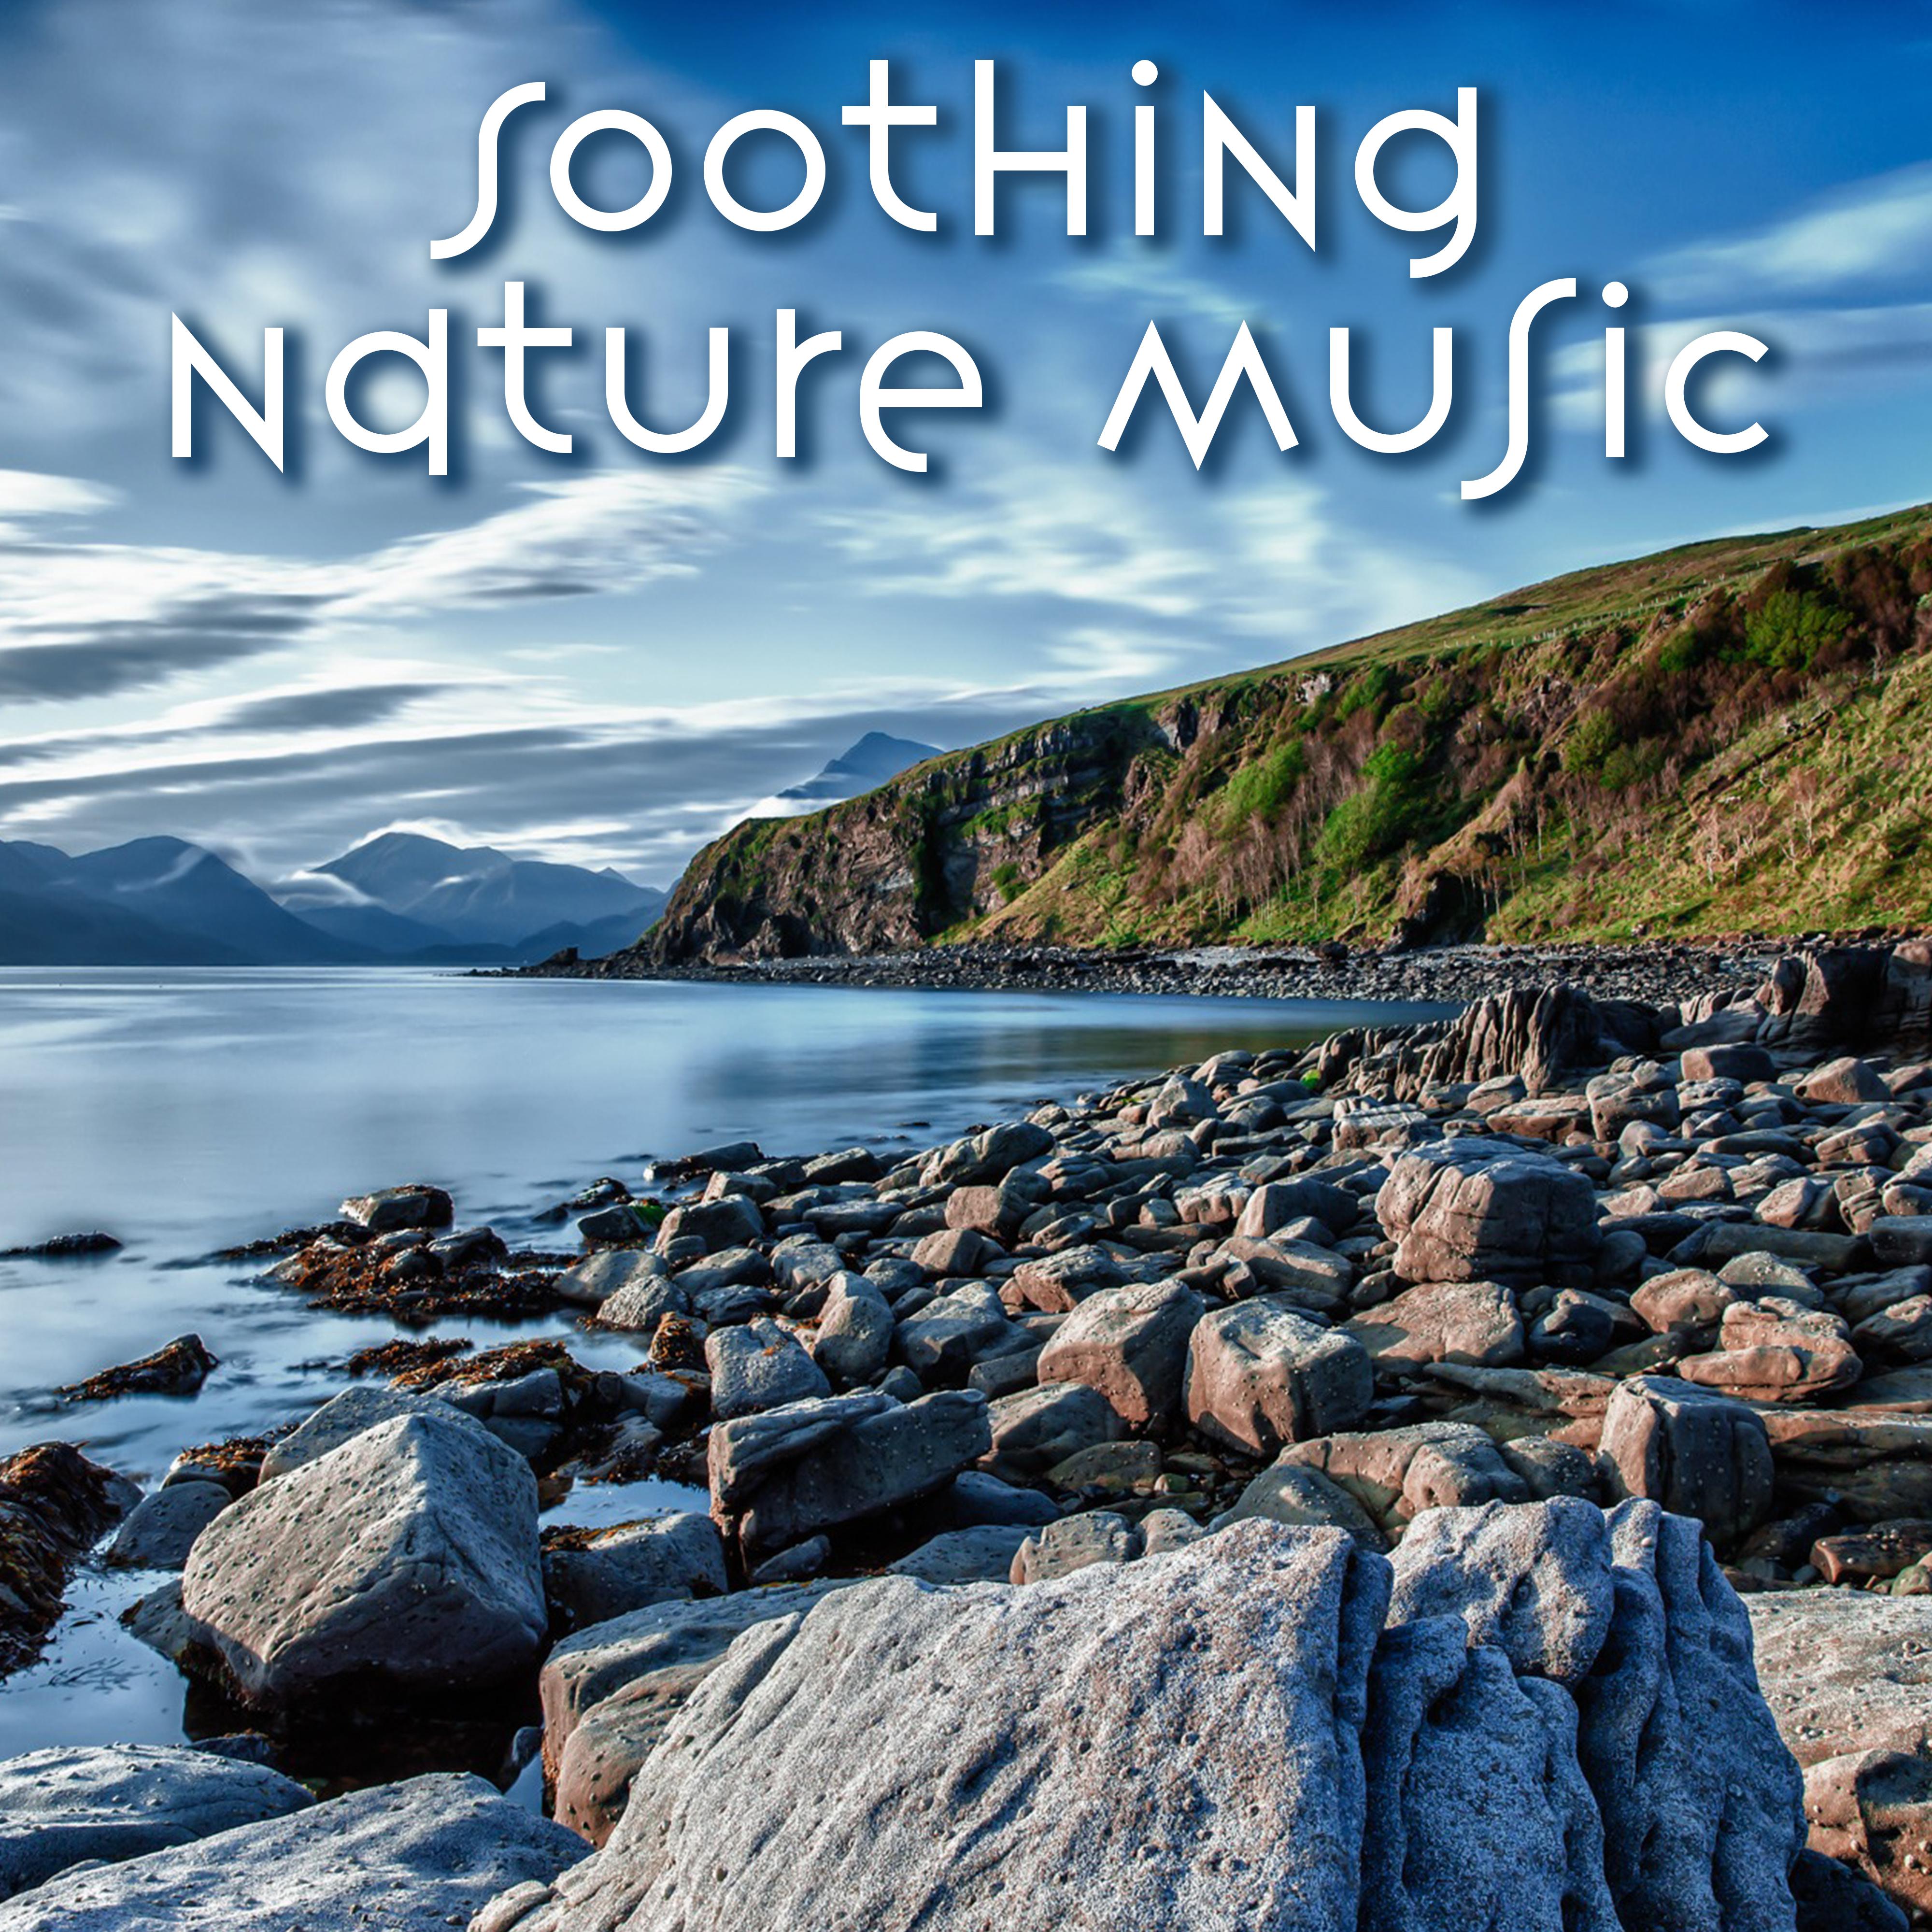 Soothing Nature Music – Calm Sounds of Nature, New Age Sounds, Peaceful Music, Mind Control